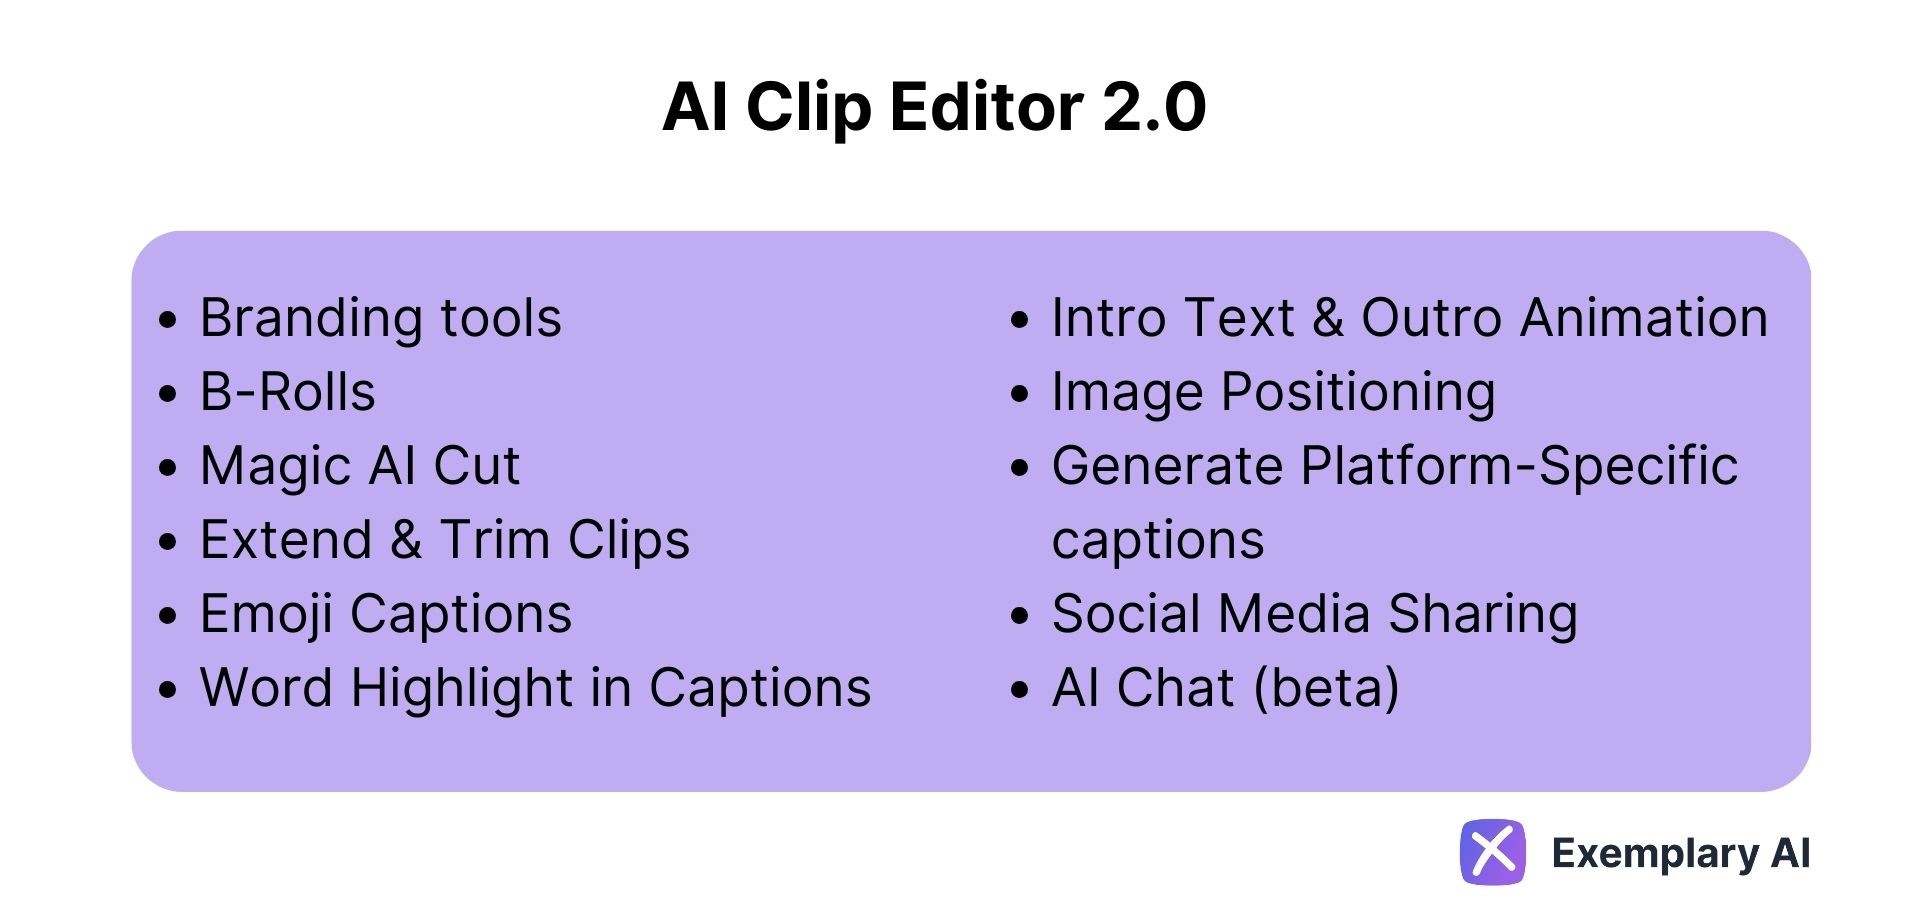 AI Clip Editor 2.0: Branding tools, B-Rolls, Magic AI Cut, Extend & Trim Clips, Emoji Captions, Word Highlight in Captions, Intro Text & Outro Animation, Image Positioning, Generate Platform-Specific captions, Social Media Sharing, AI Chat (beta)